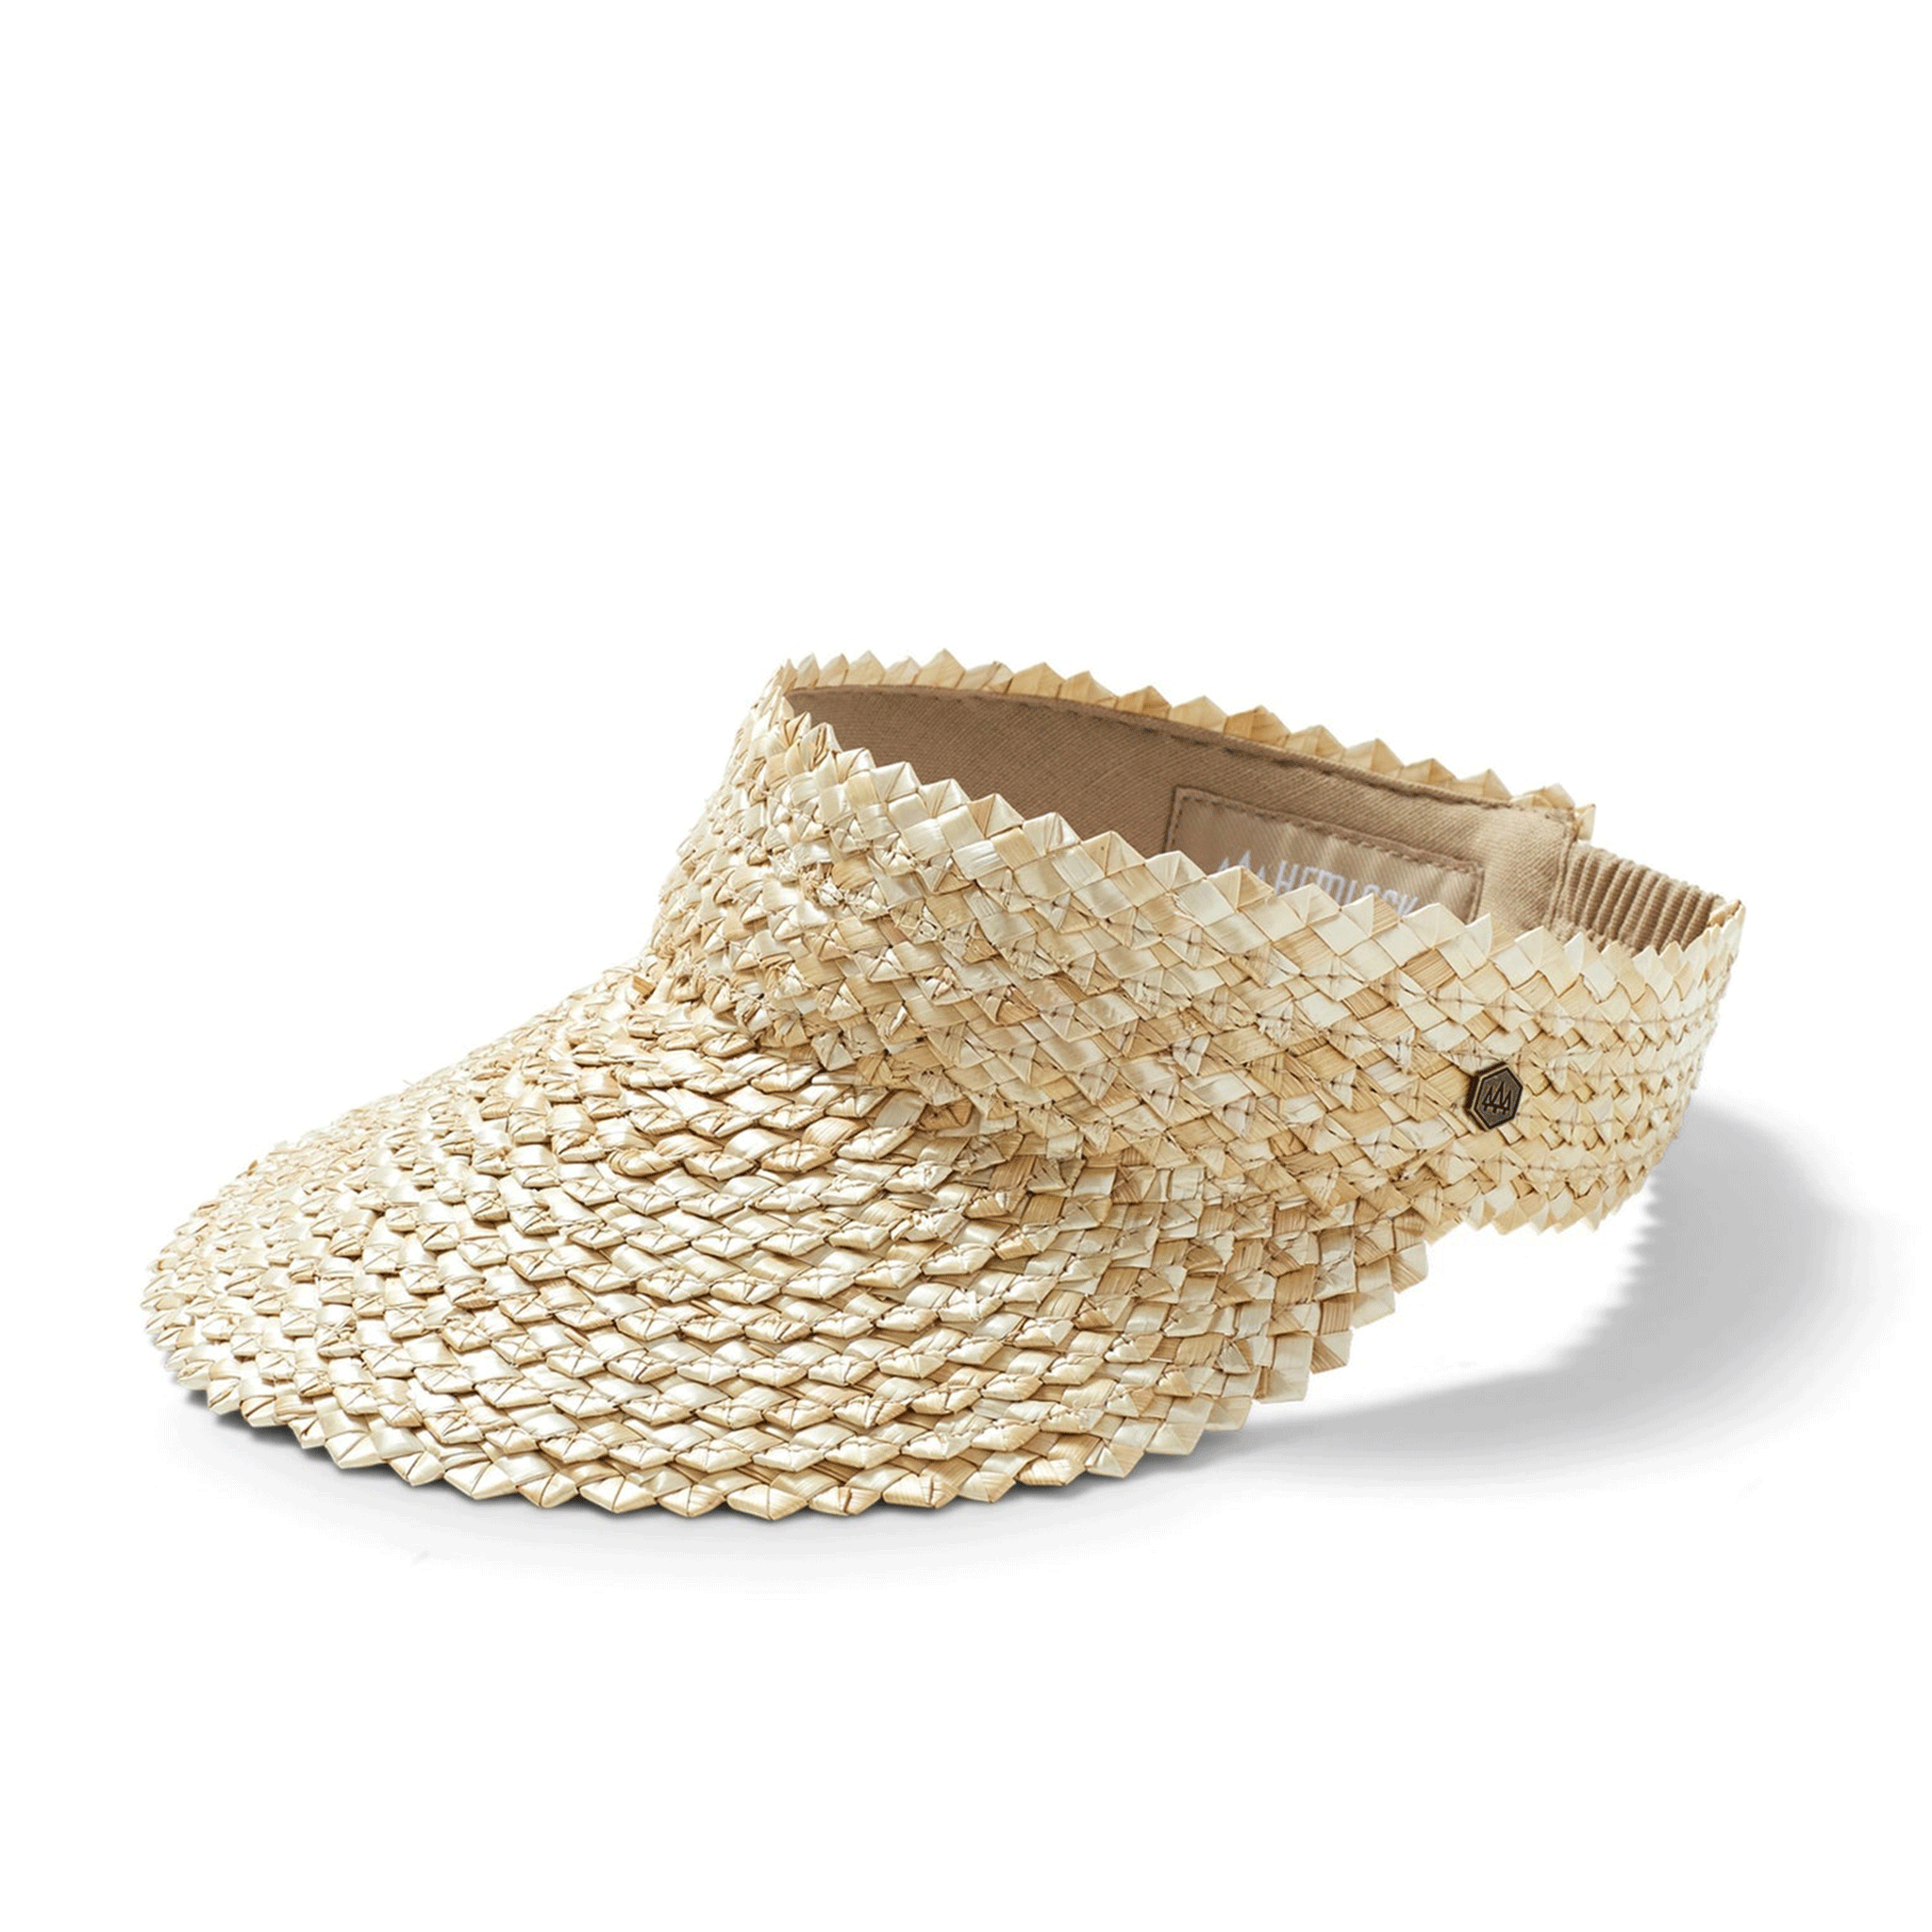 A hand woven what straw visor in a light blonde color. It features an elastic strap in the back that has slight give to fit most.